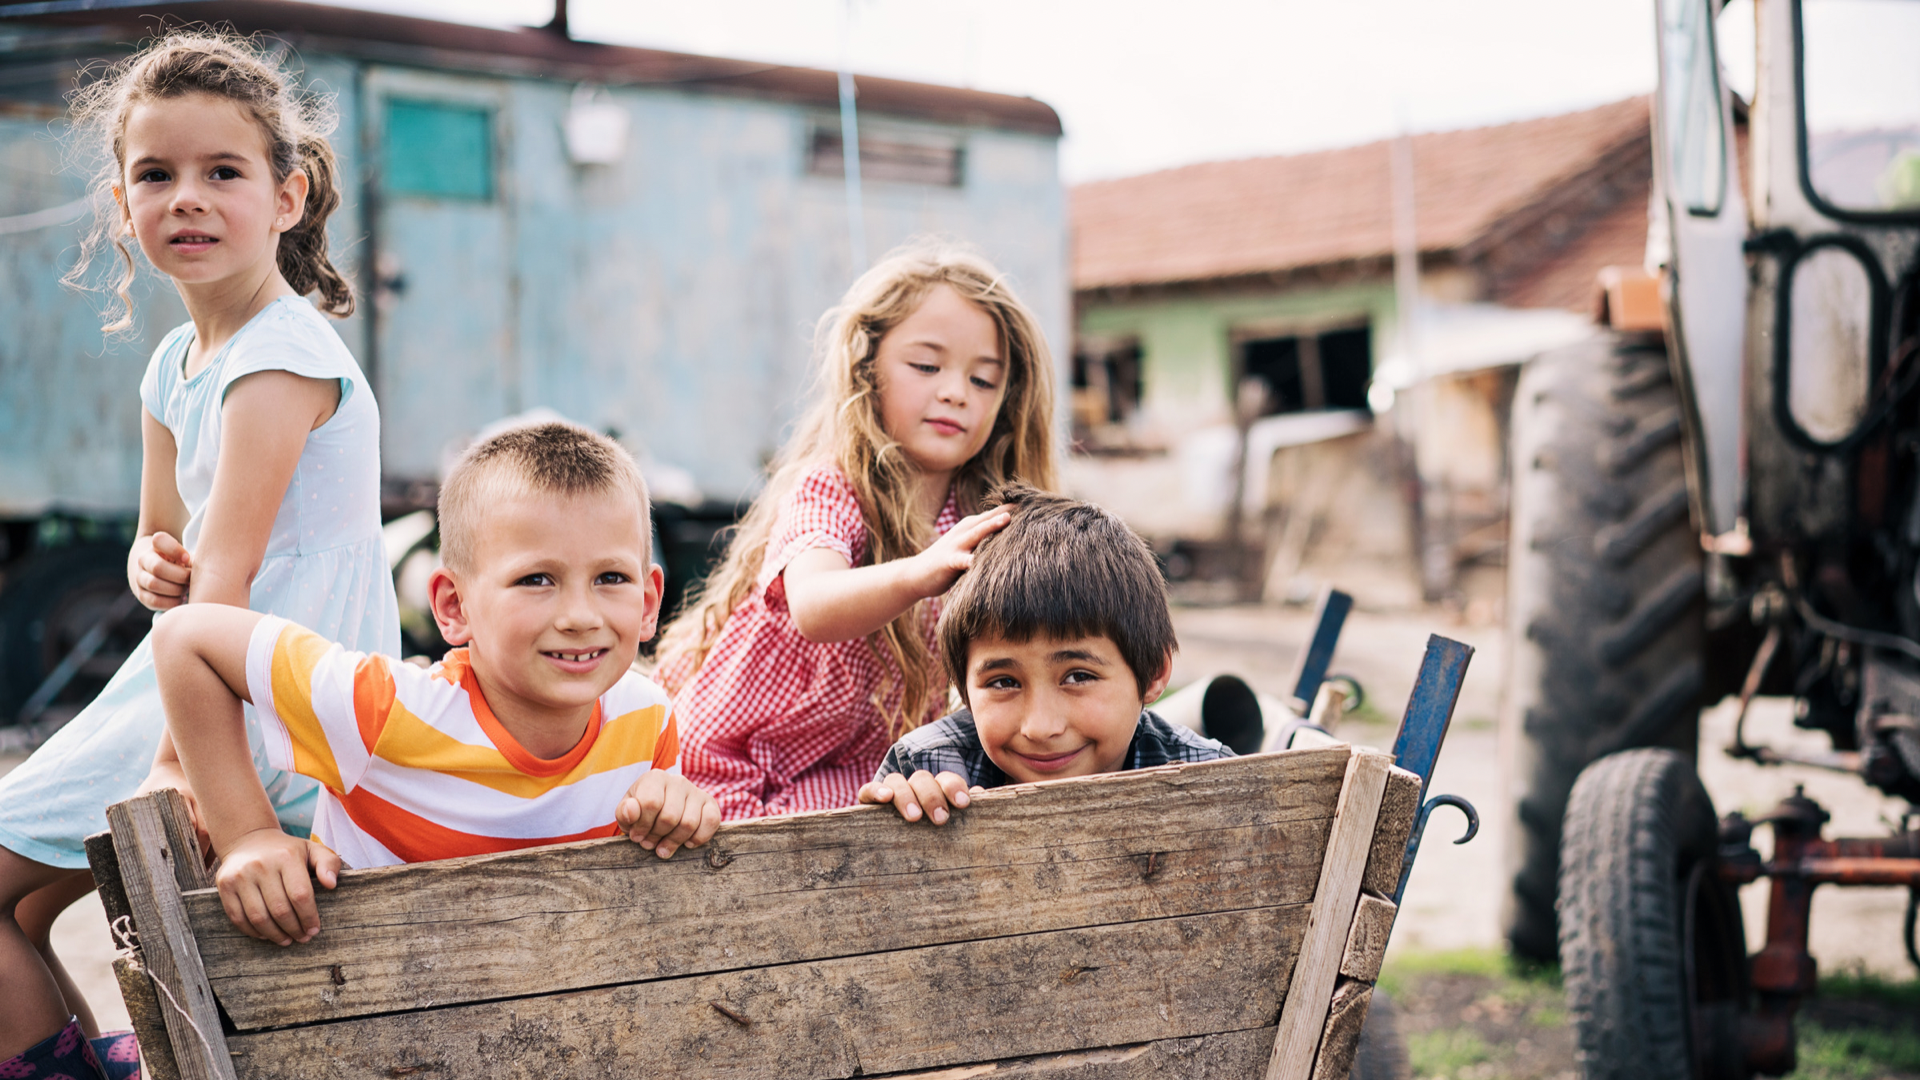 Kids on farms - featured image.